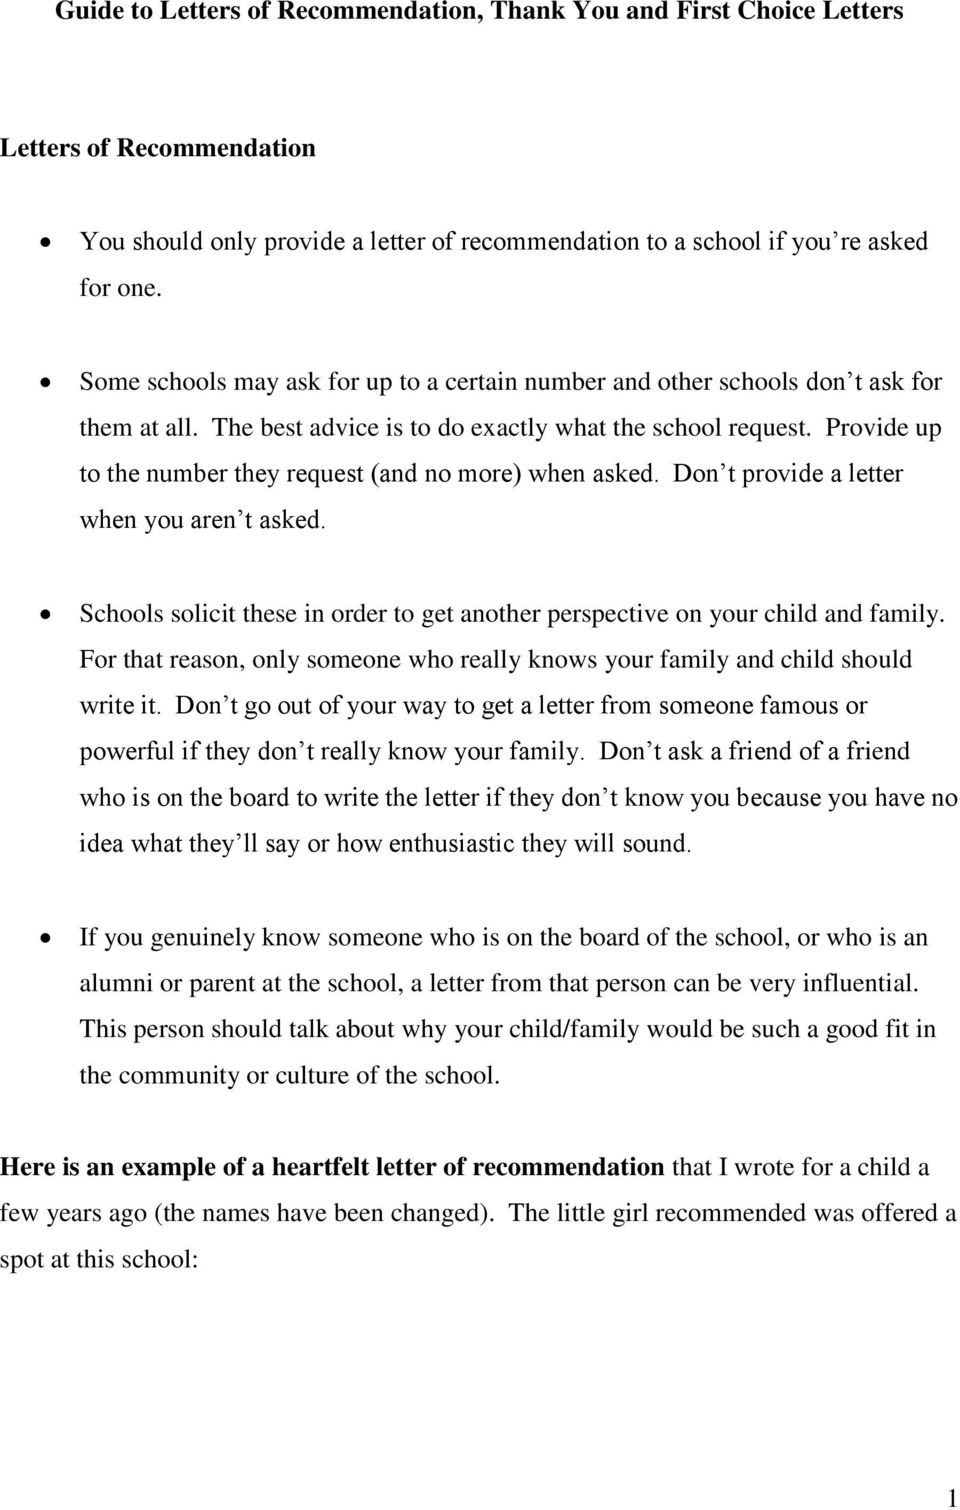 Provide up to the number they request (and no more) when asked. Don t provide a letter when you aren t asked. Schools solicit these in order to get another perspective on your child and family.